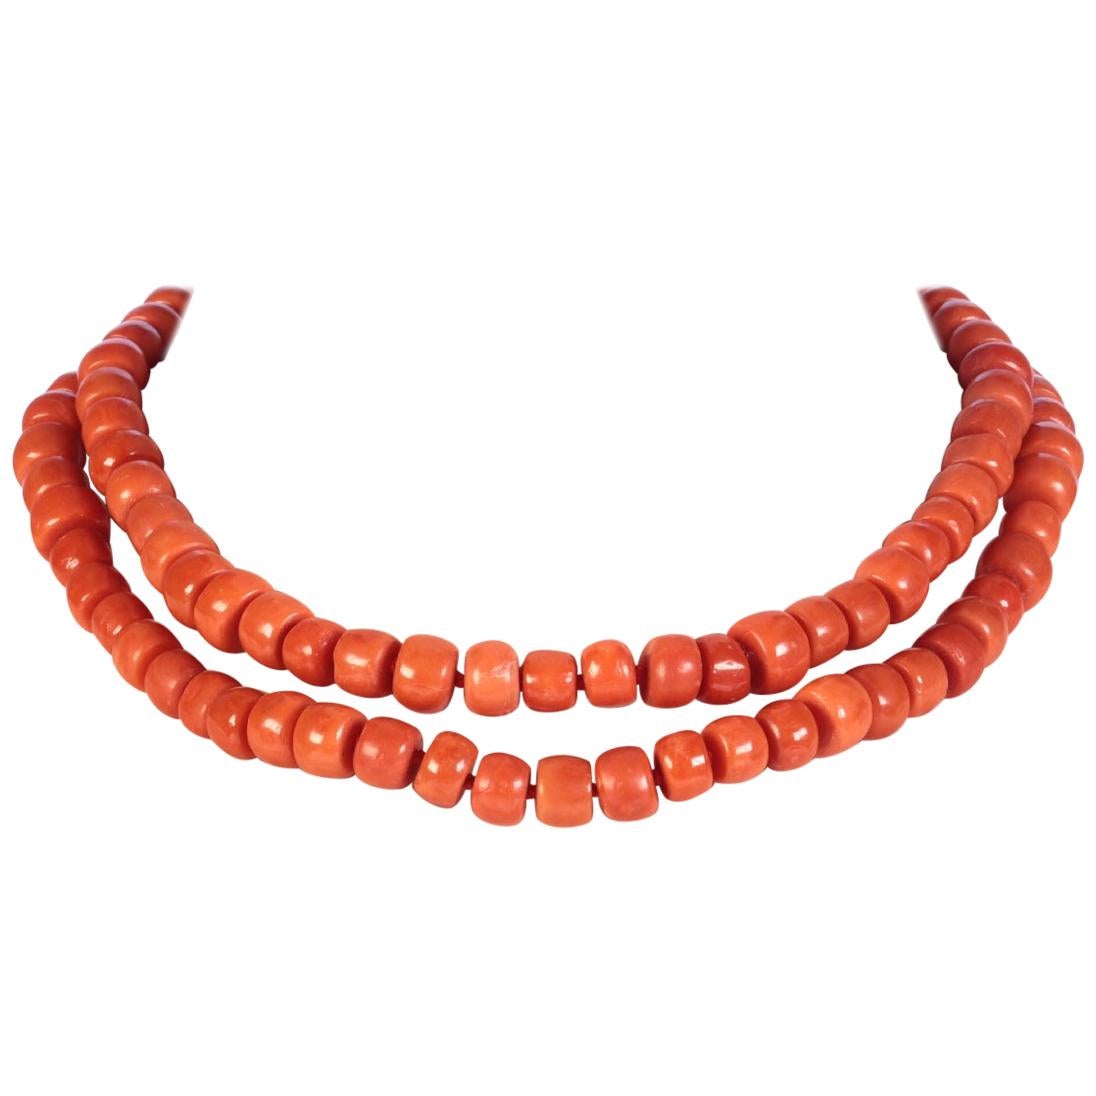 Antique 108 Blood Coral Long Necklace with Thick Beads, 1900s For Sale